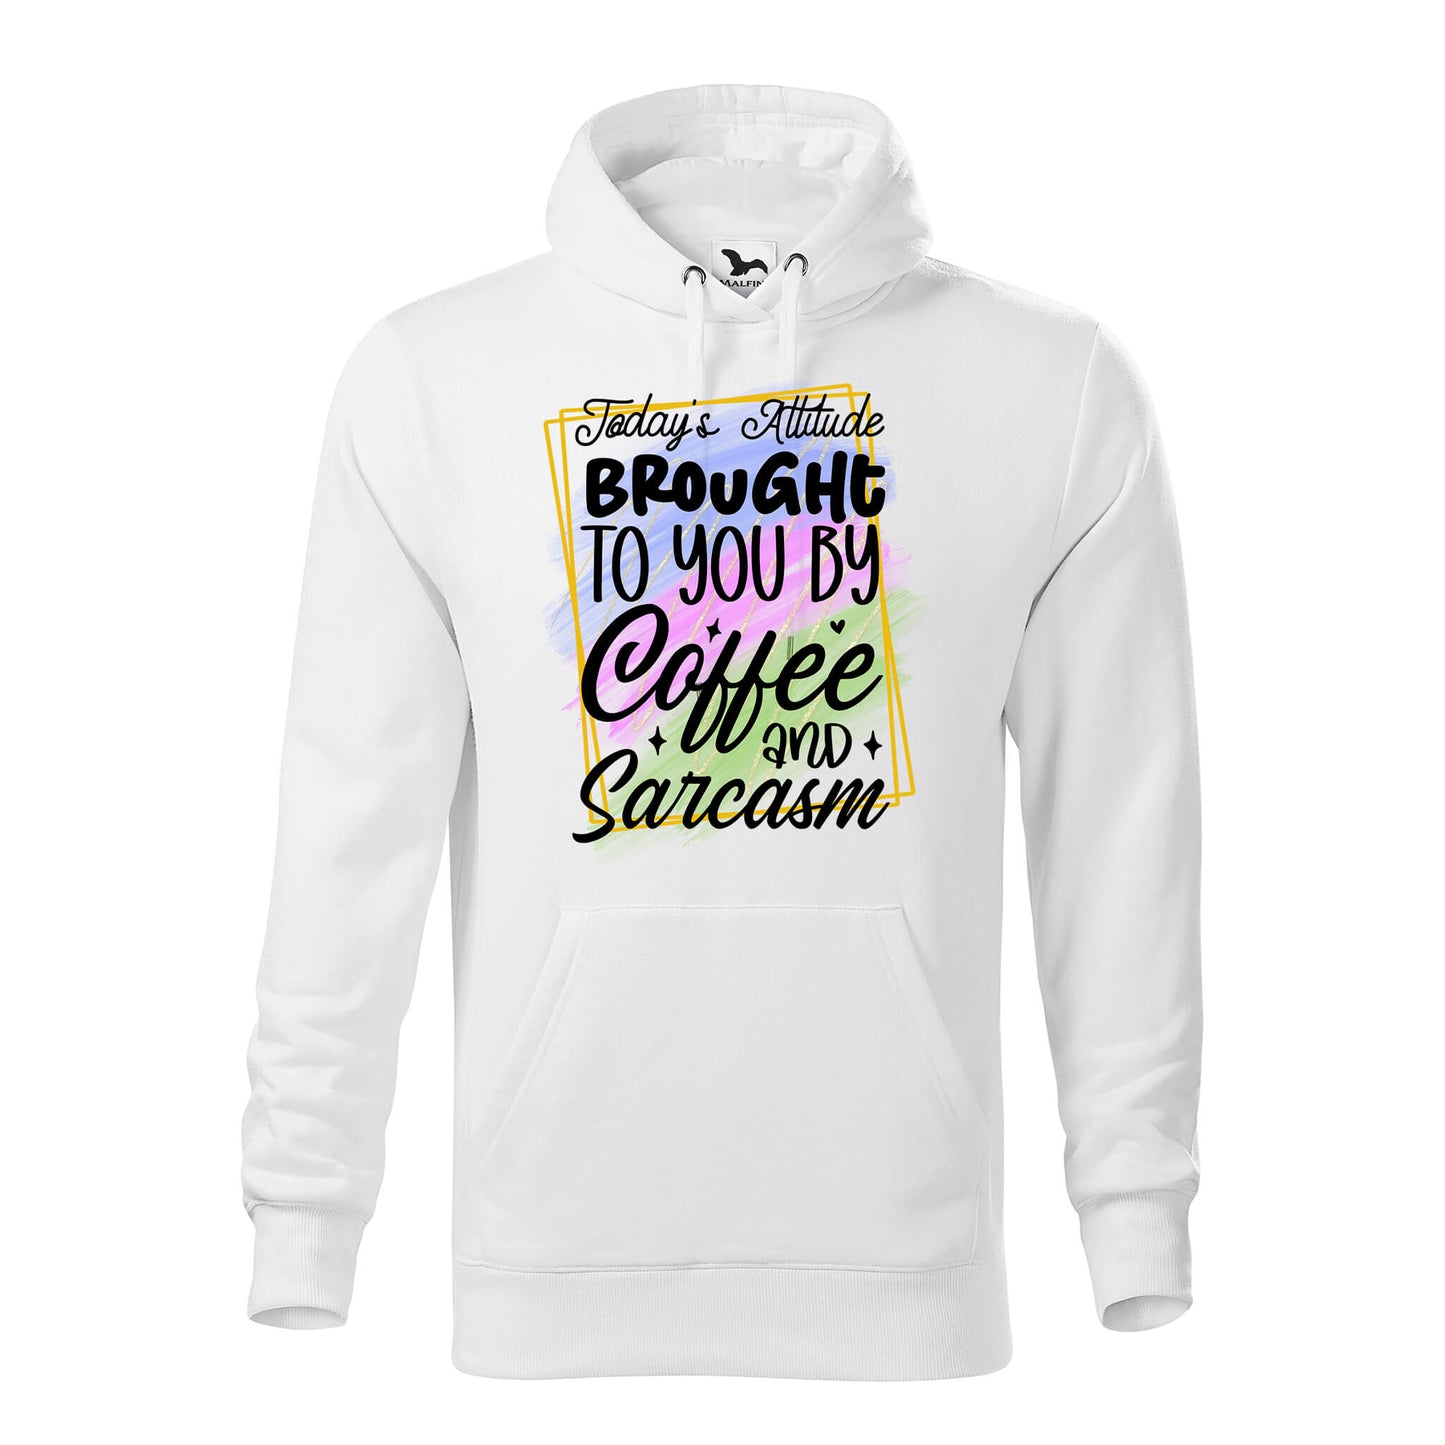 Todays attitude brought to you by hoodie - rvdesignprint